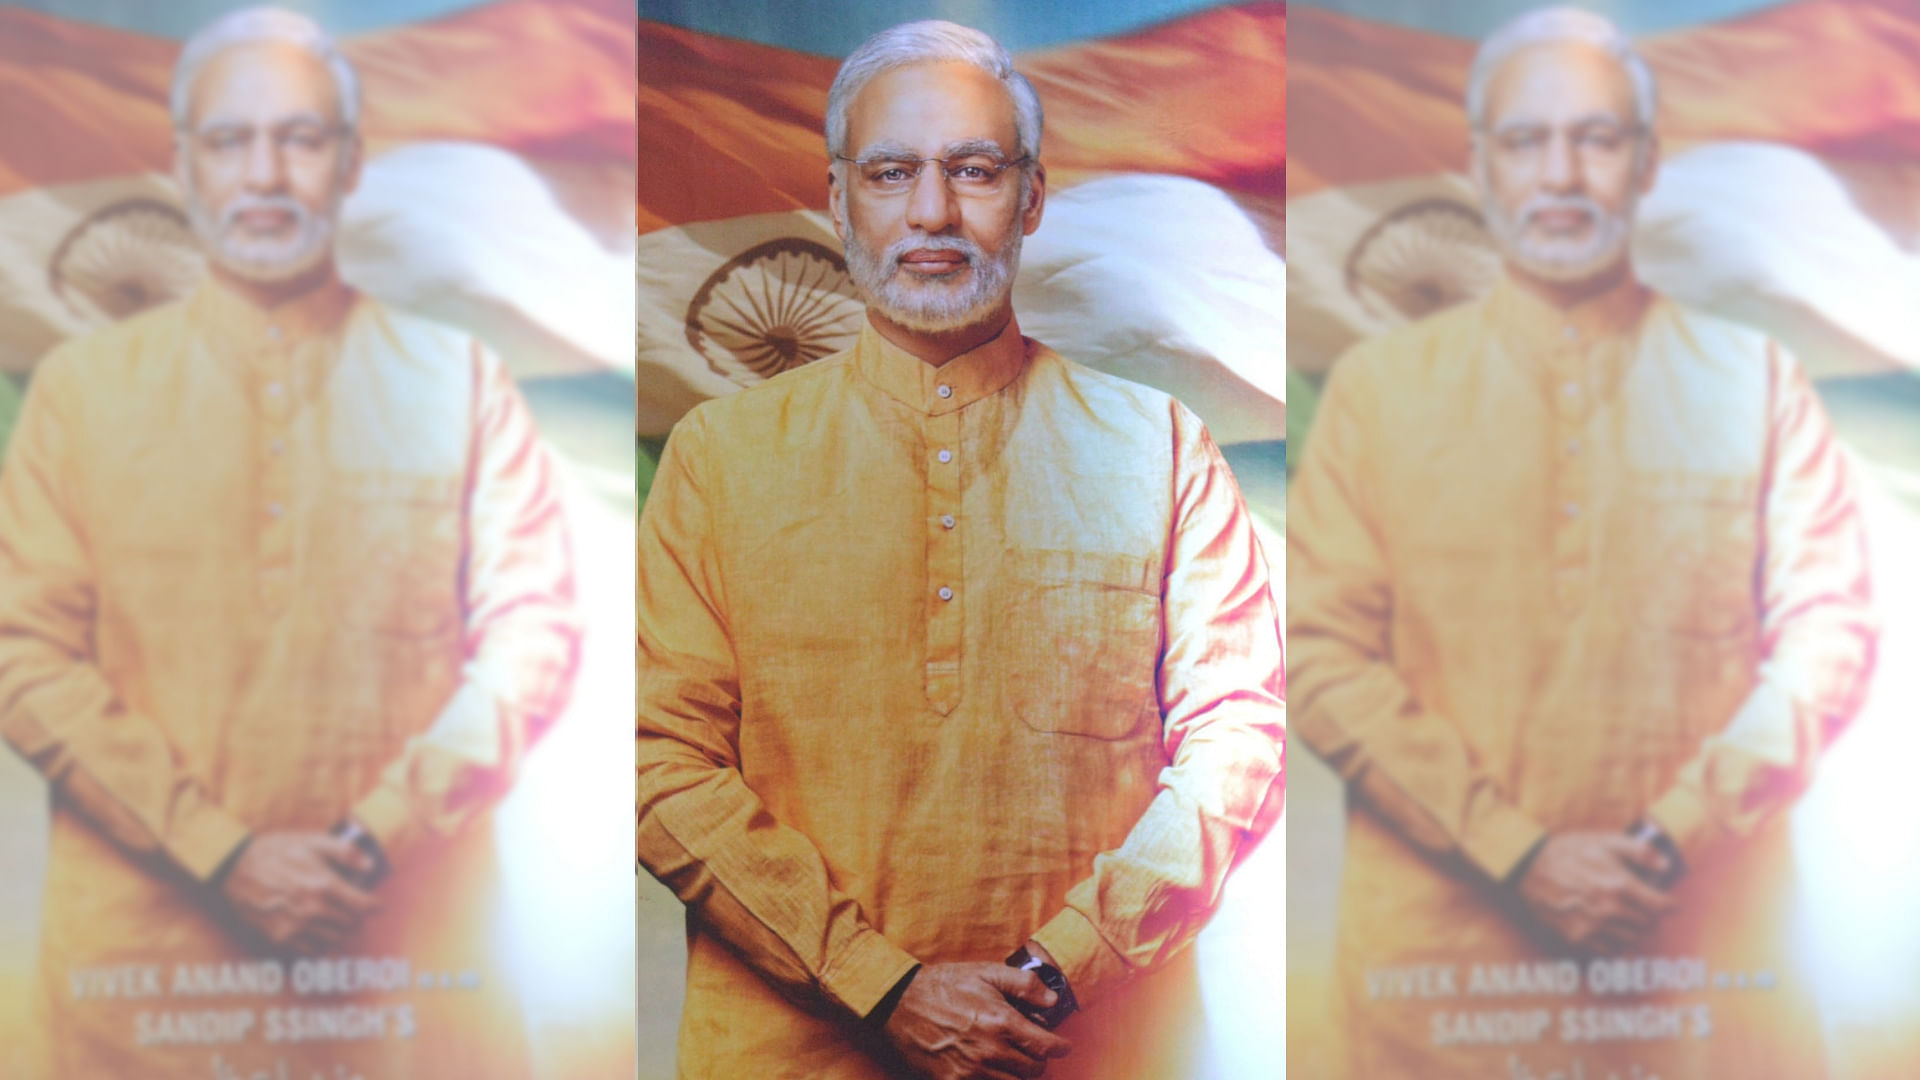 A poster of the biopic on Modi featuring Vivek Oberoi.